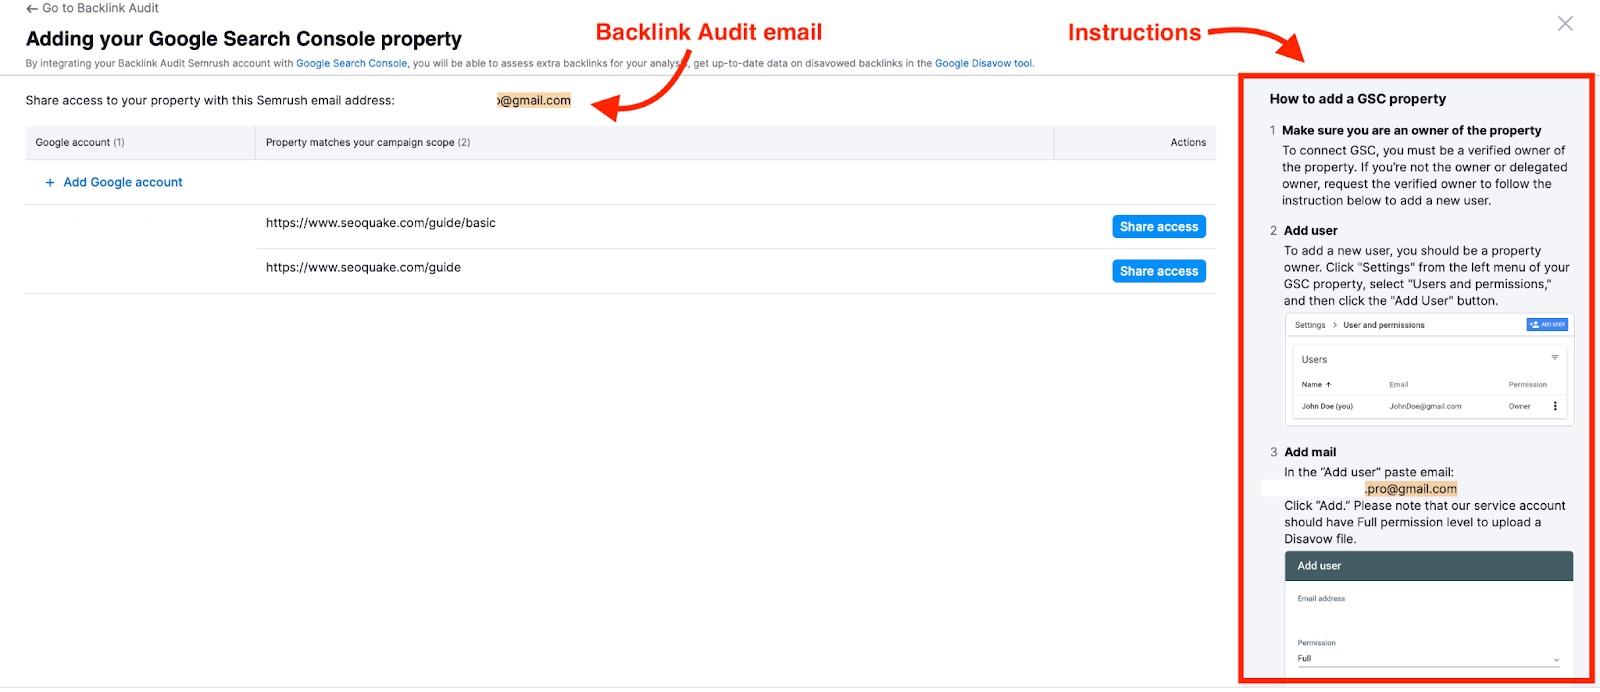 Connecting Backlink Audit to Google Accounts image 10